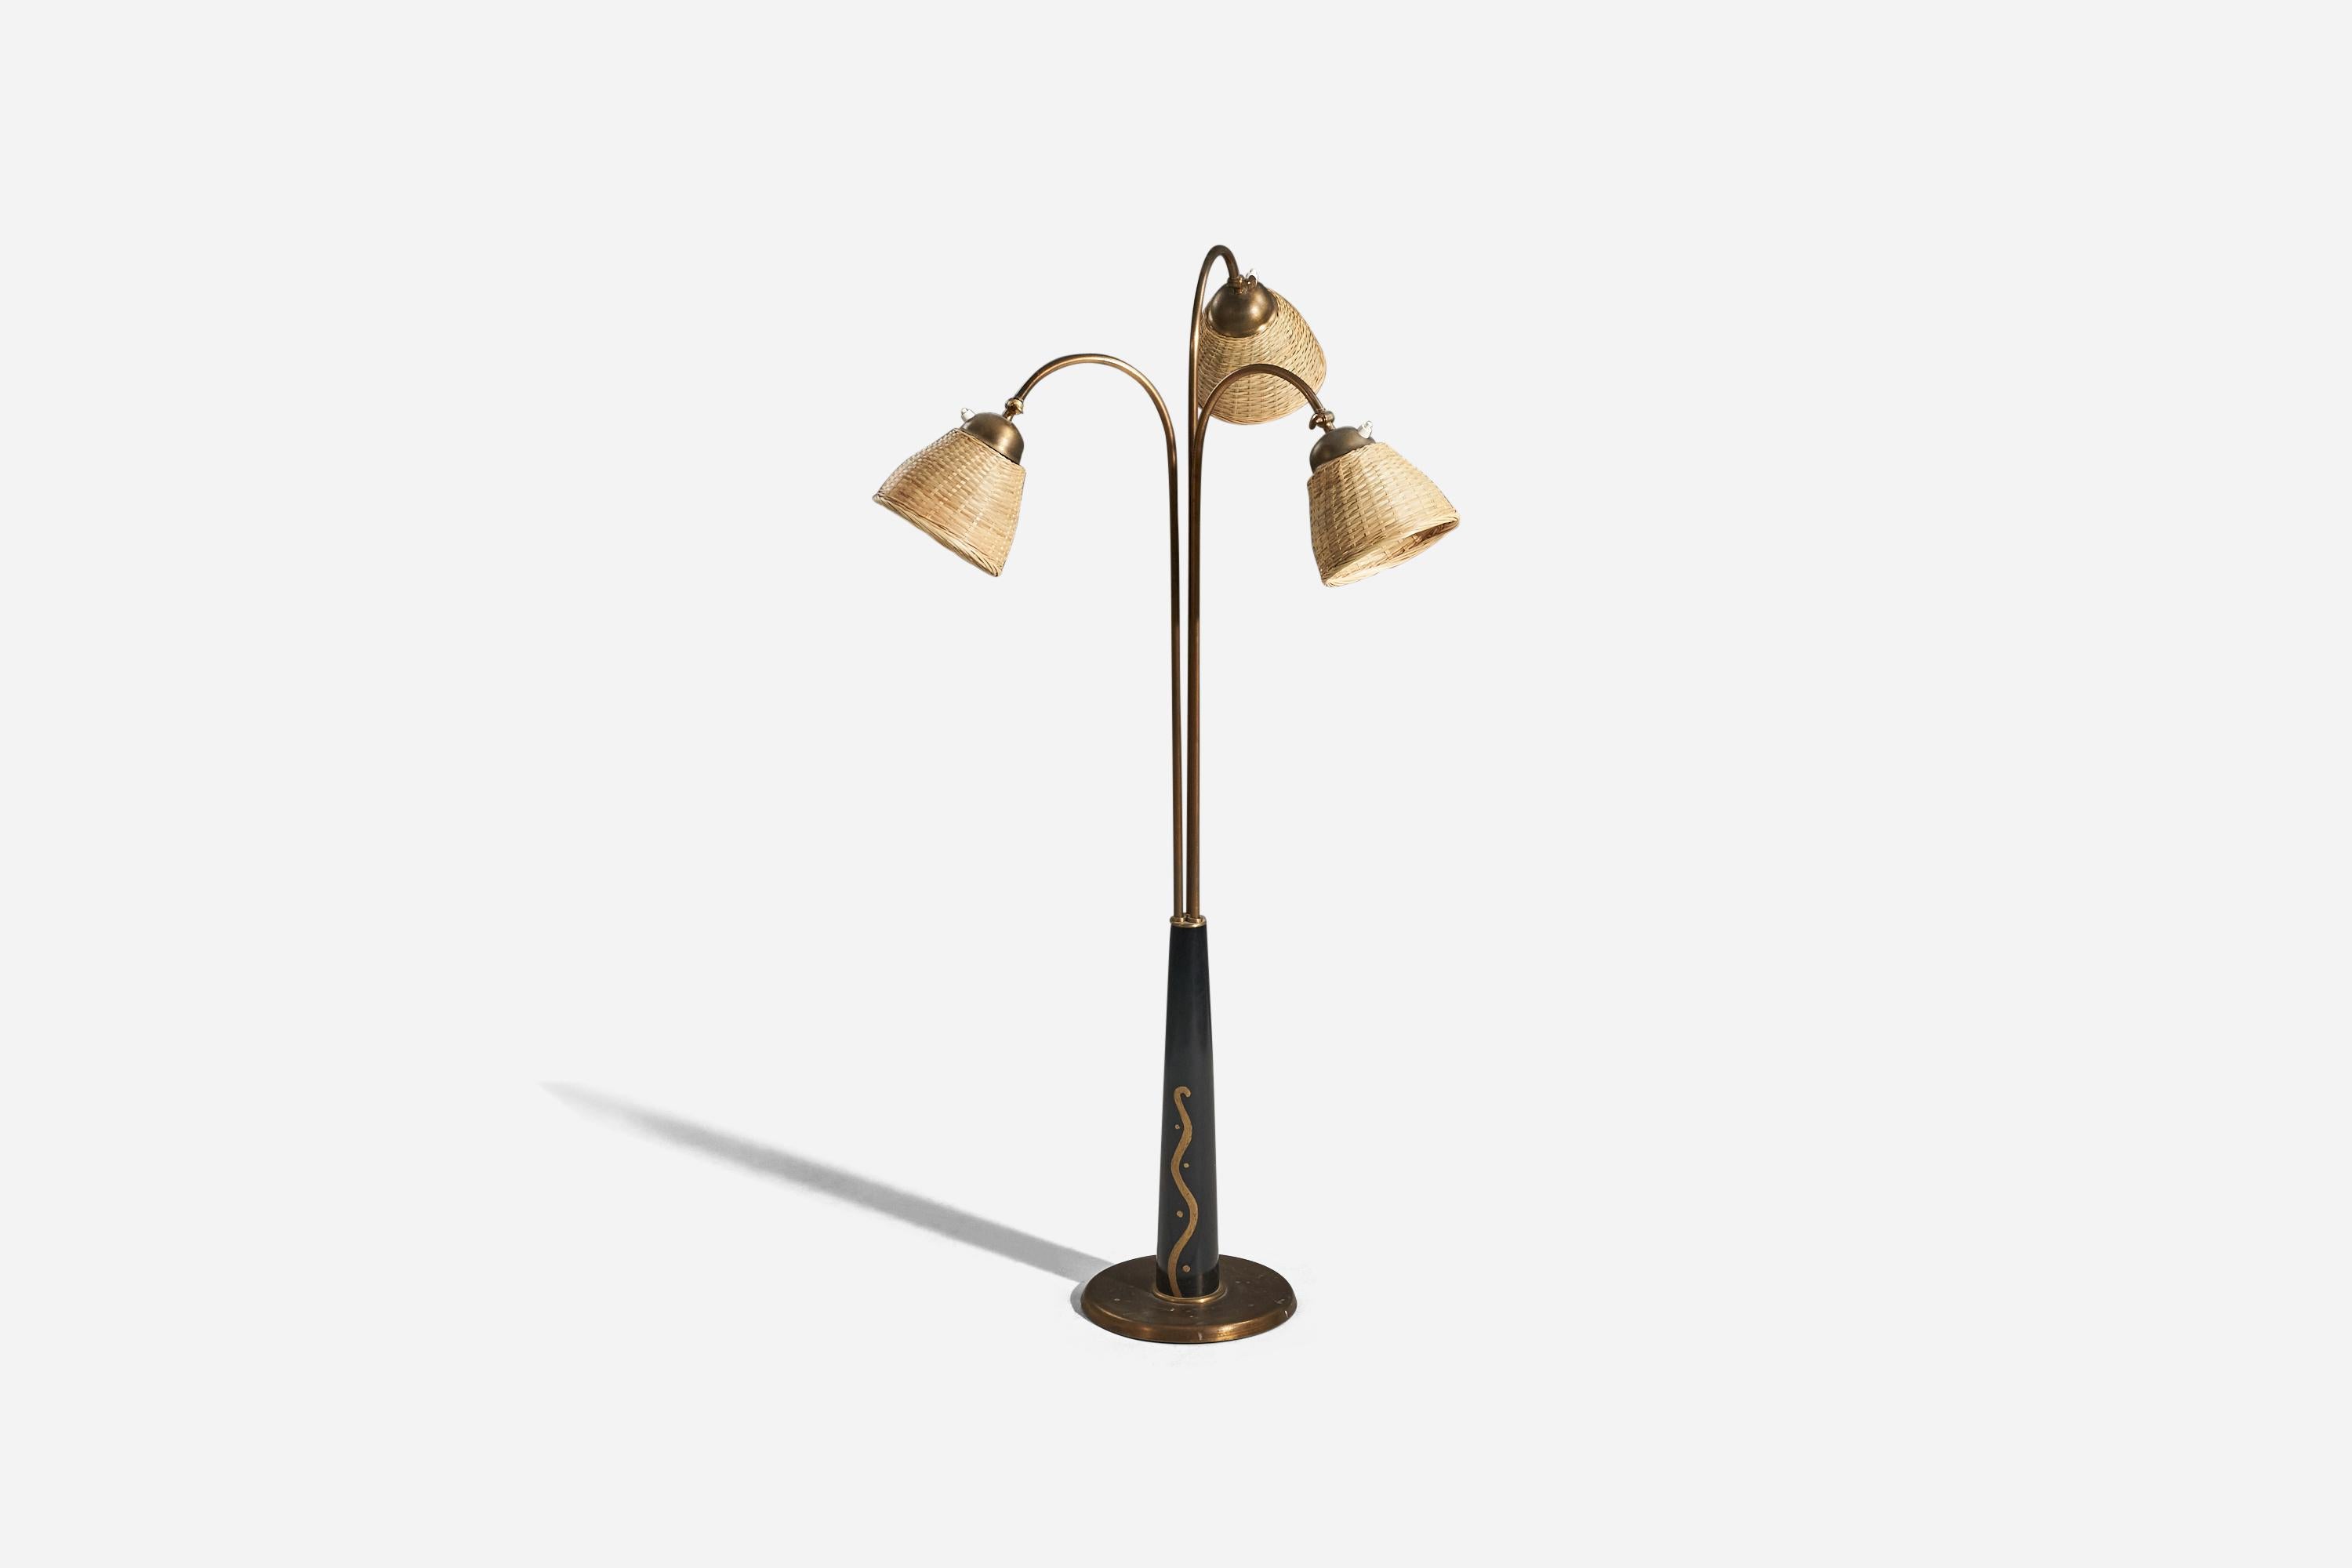 A brass, wood inlays and rattan, adjustable floor lamp; design attributed to Hans Bergström, Sweden, 1940s. 

Variable dimensions, measured as illustrated in the first image.
Sold with Lampshade(s). 
Stated dimensions refer to the Floor Lamp with